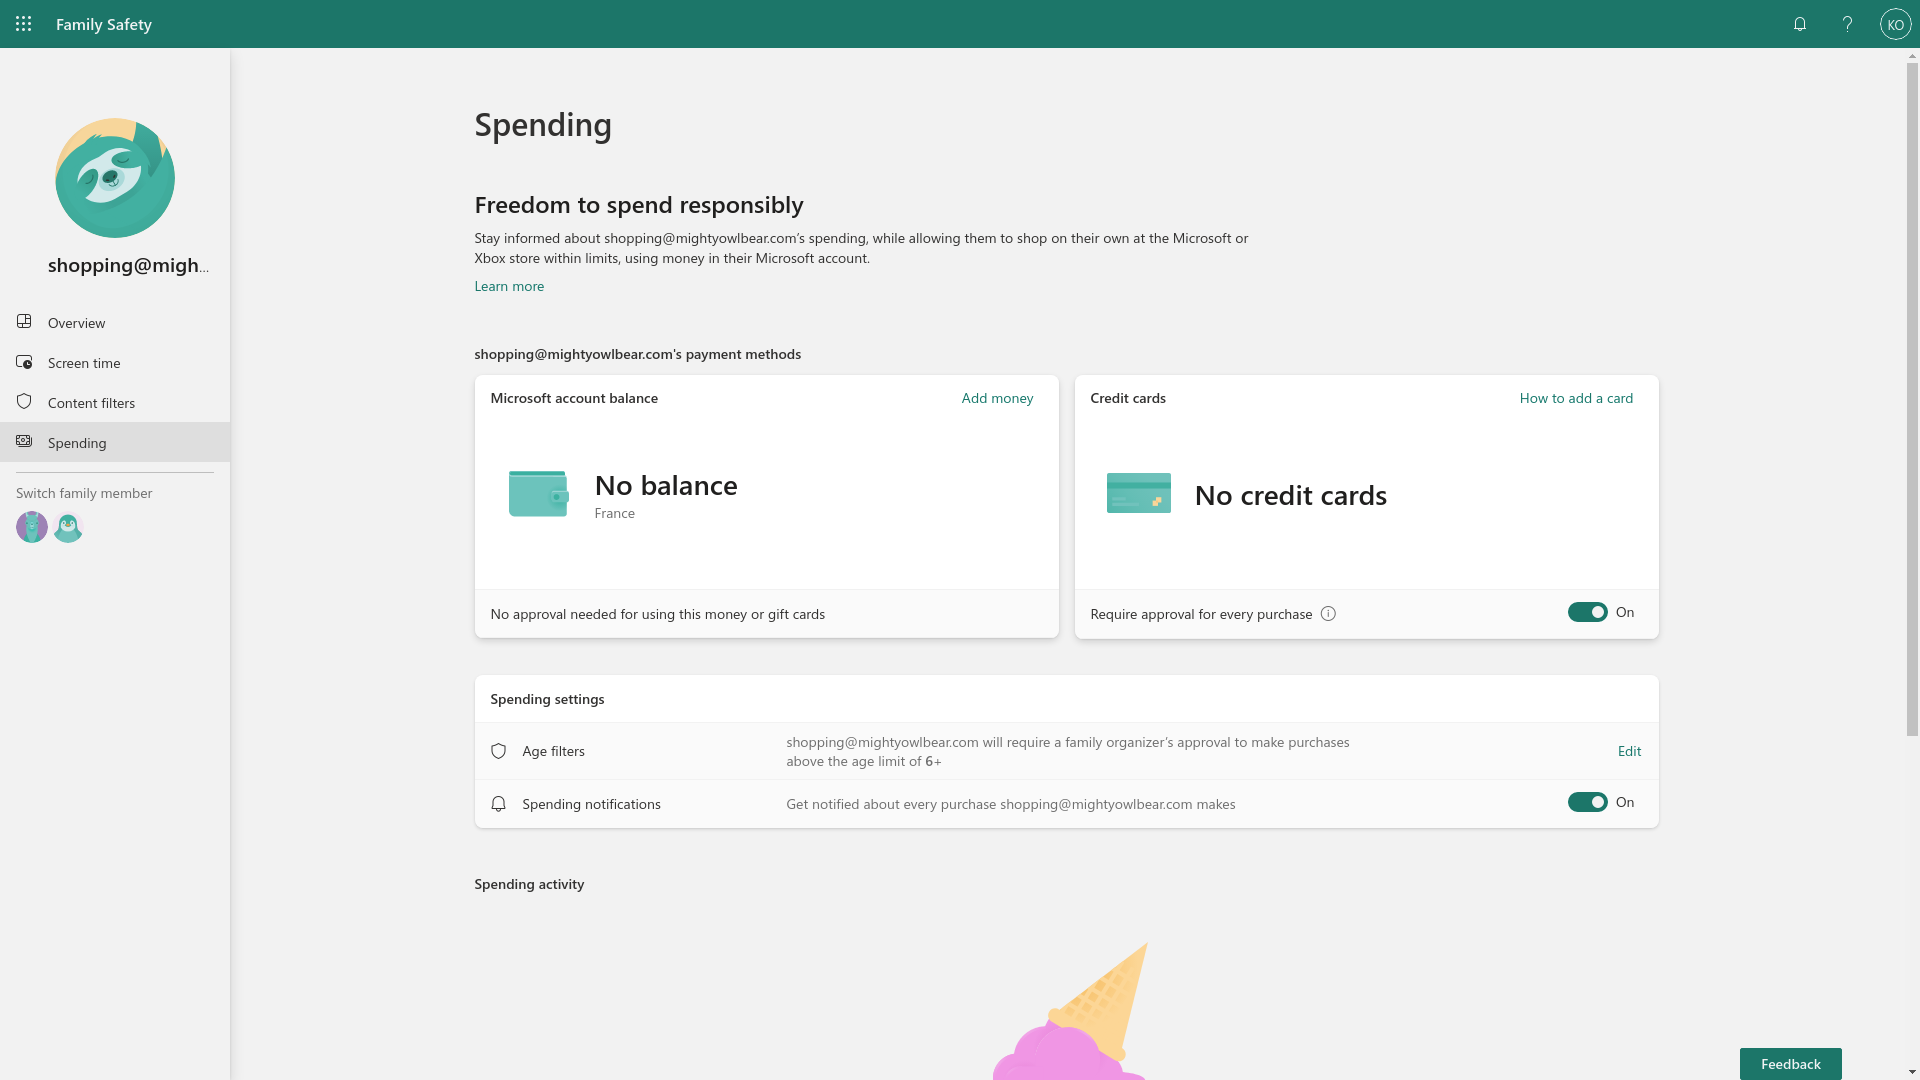 Spending page